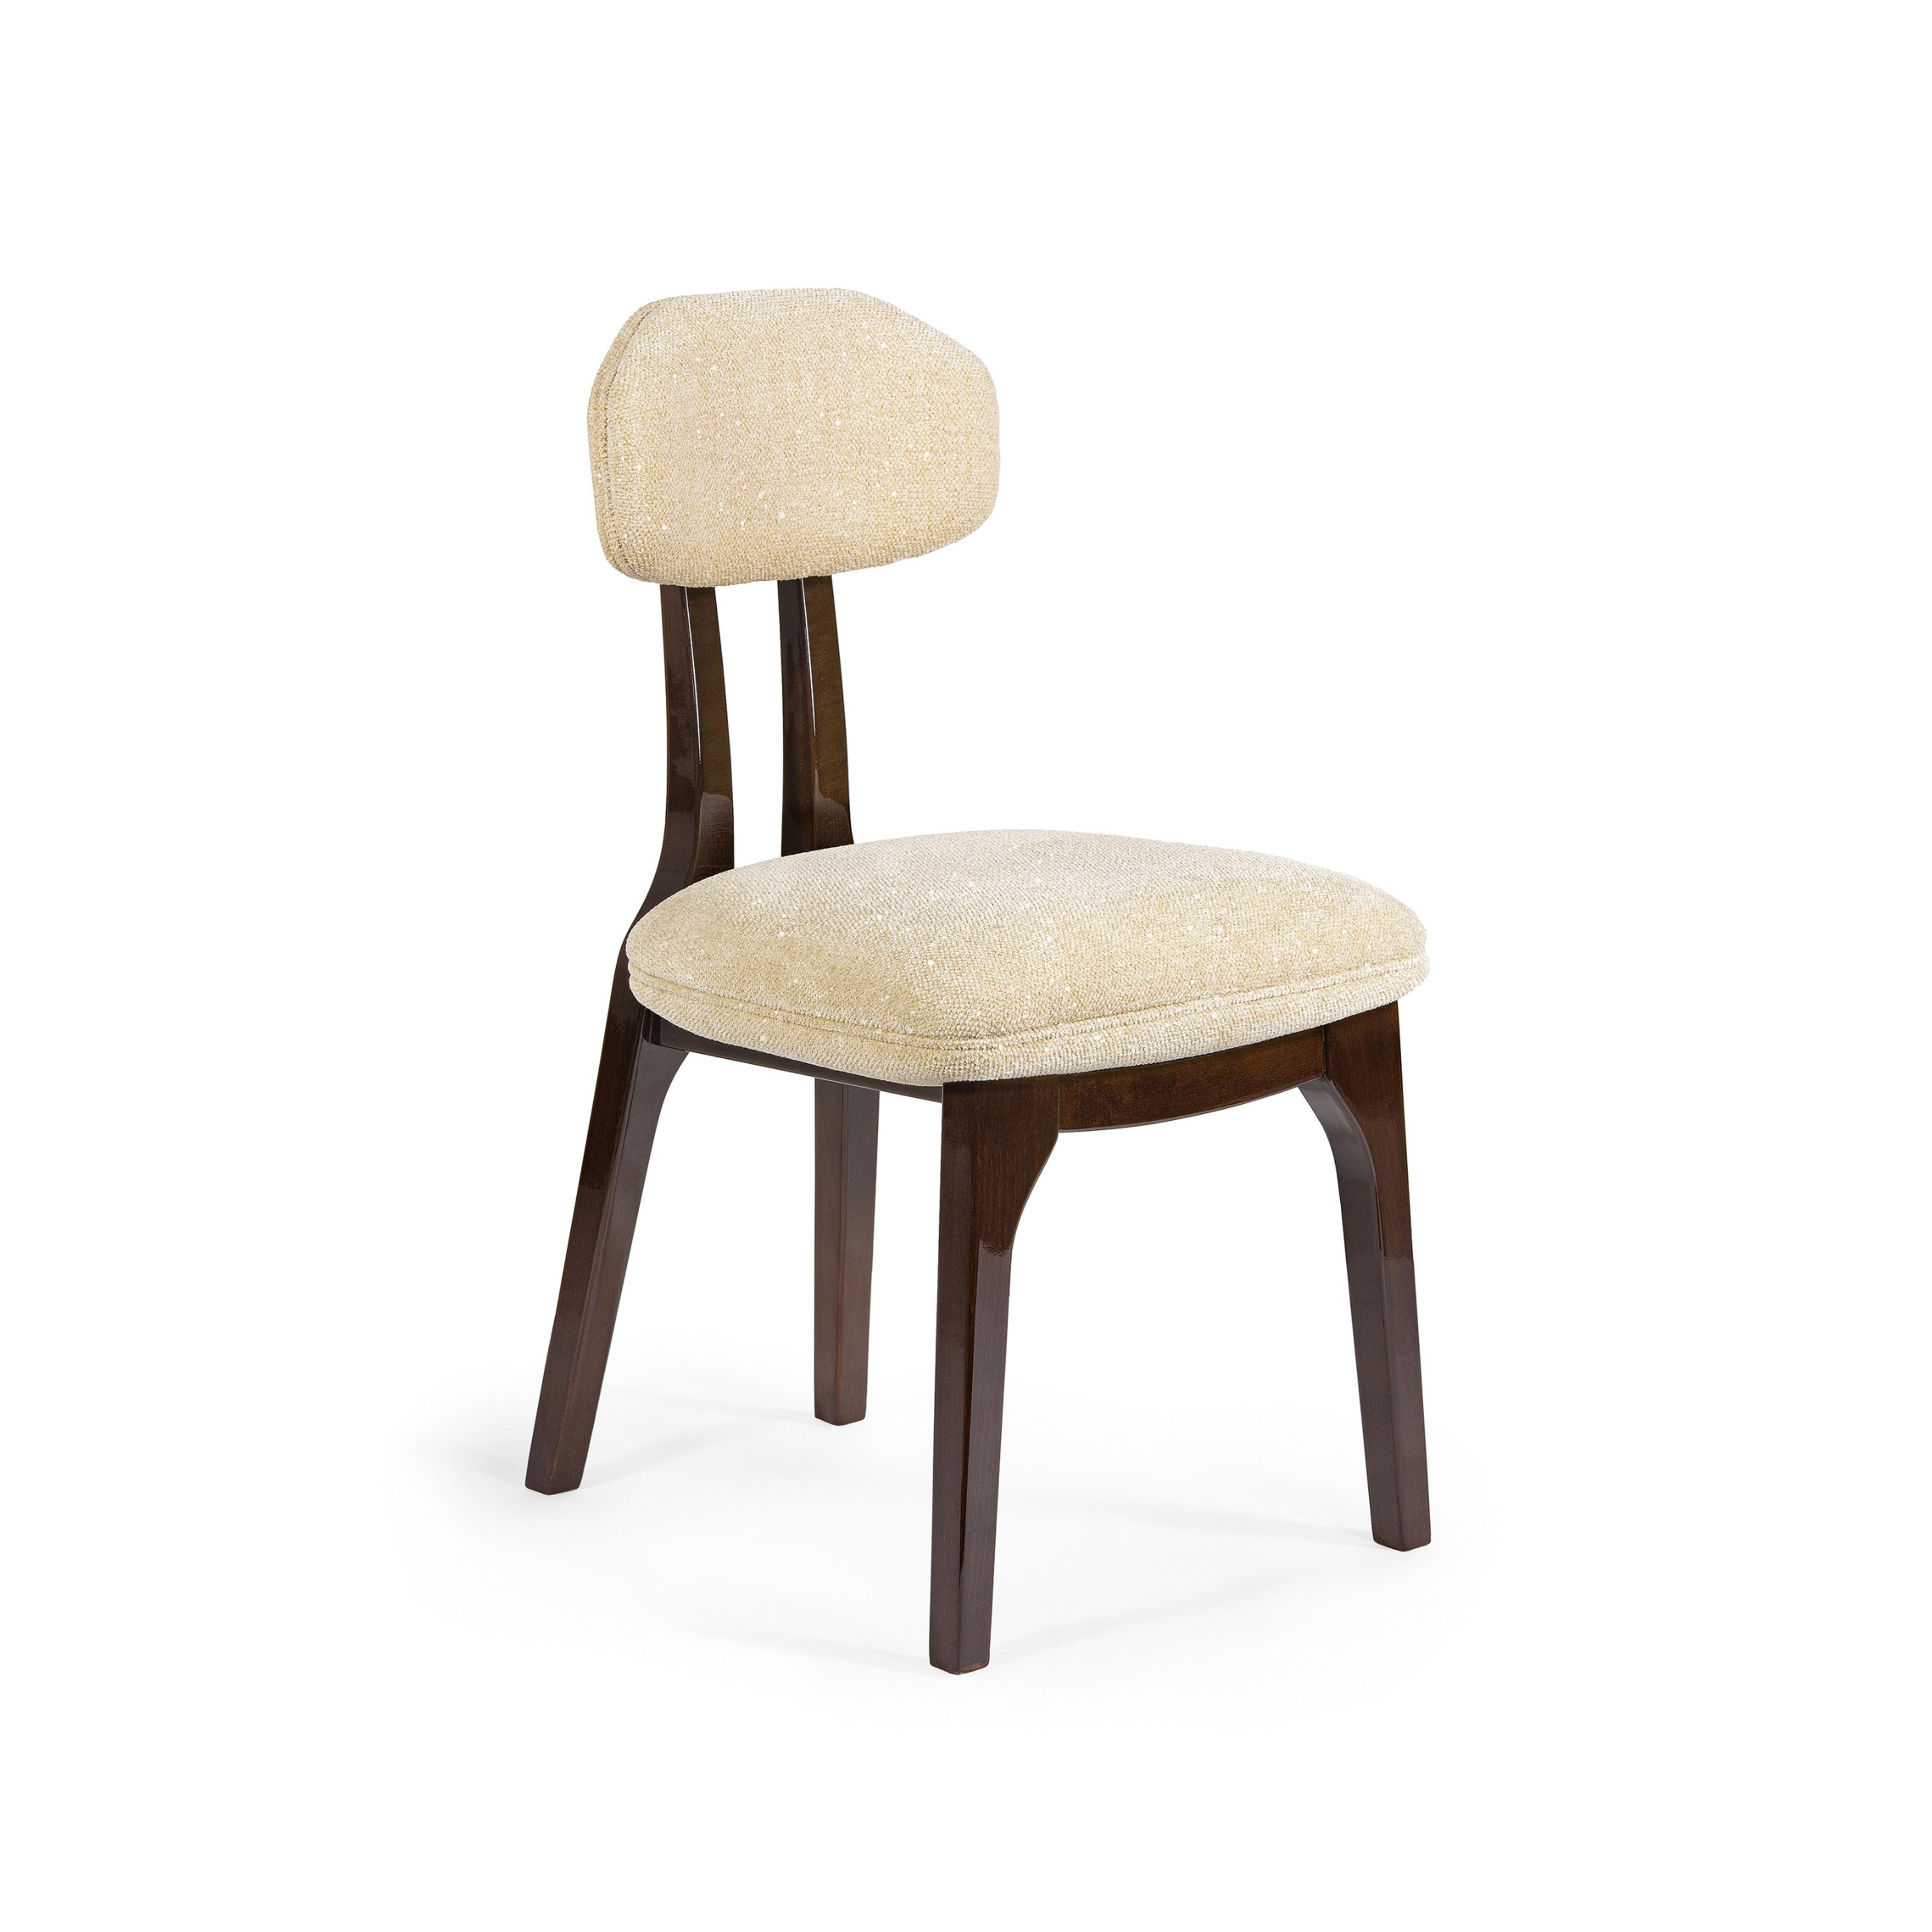 Modern Silhouette Dining Chair, Wood & COM, Insidherland by Joana Santos Barbosa For Sale